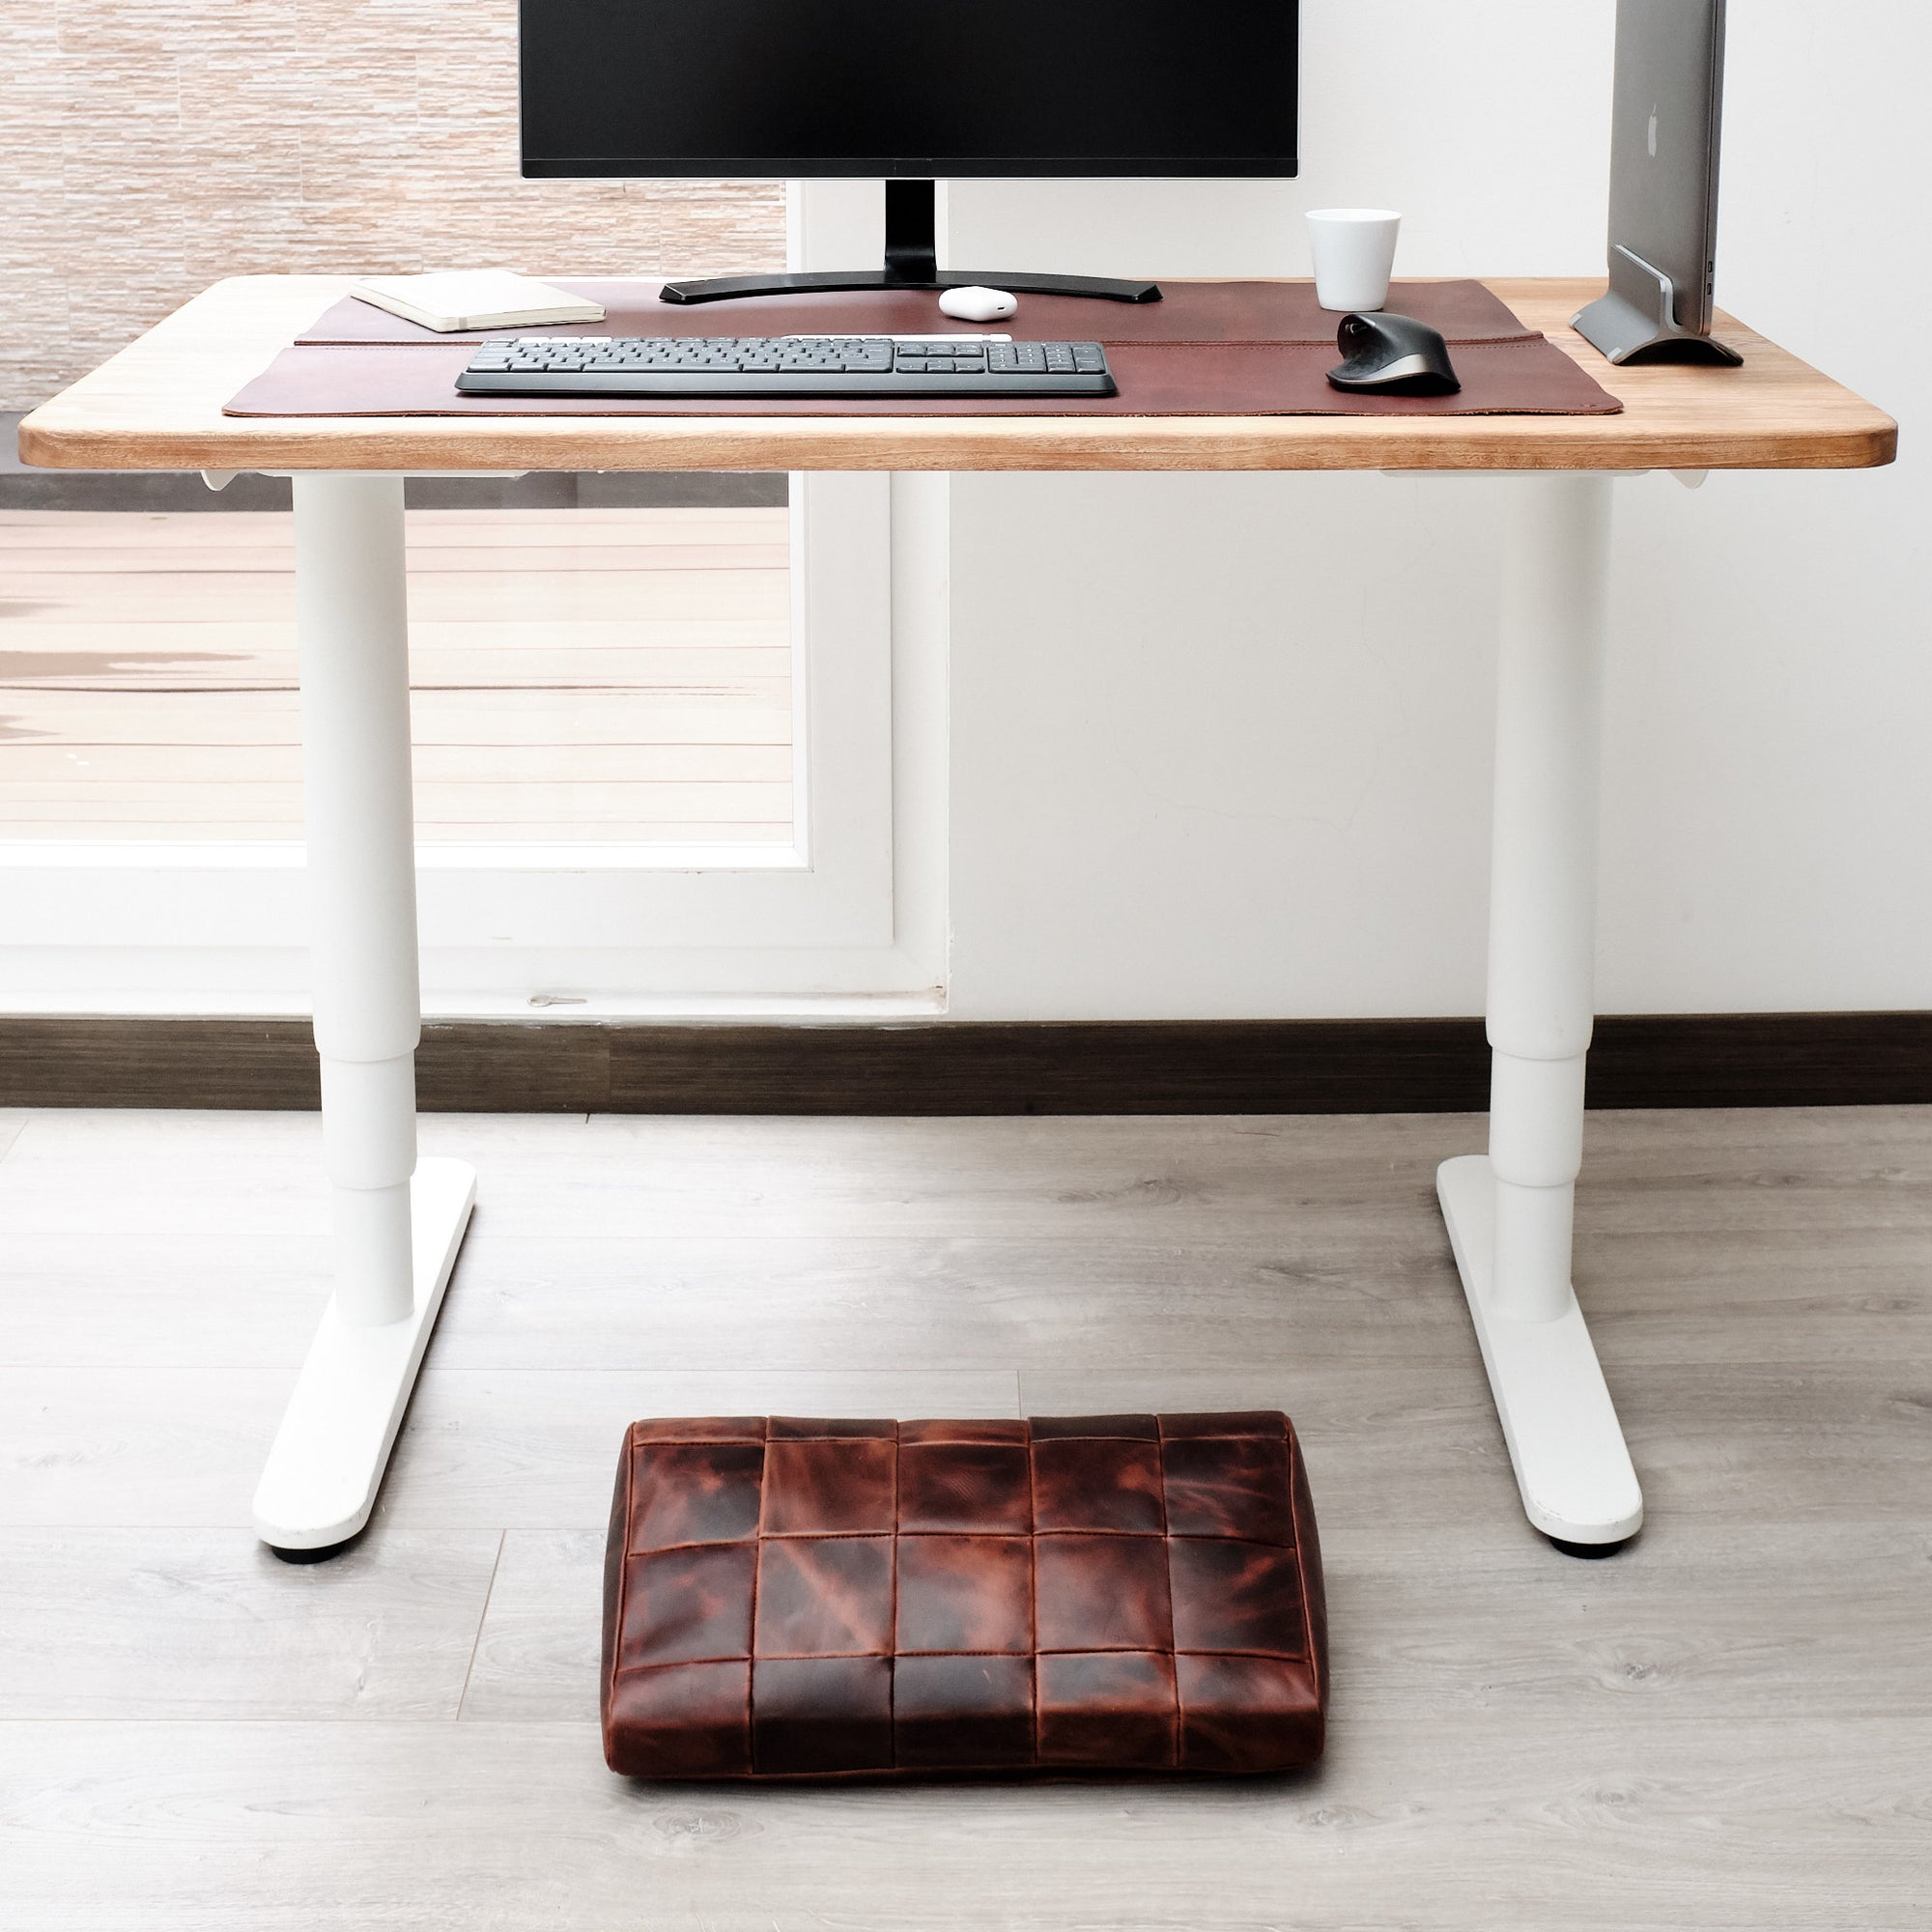 Cover. Ergonomic under desk footrest cover in distressed cognac by Capra Leather